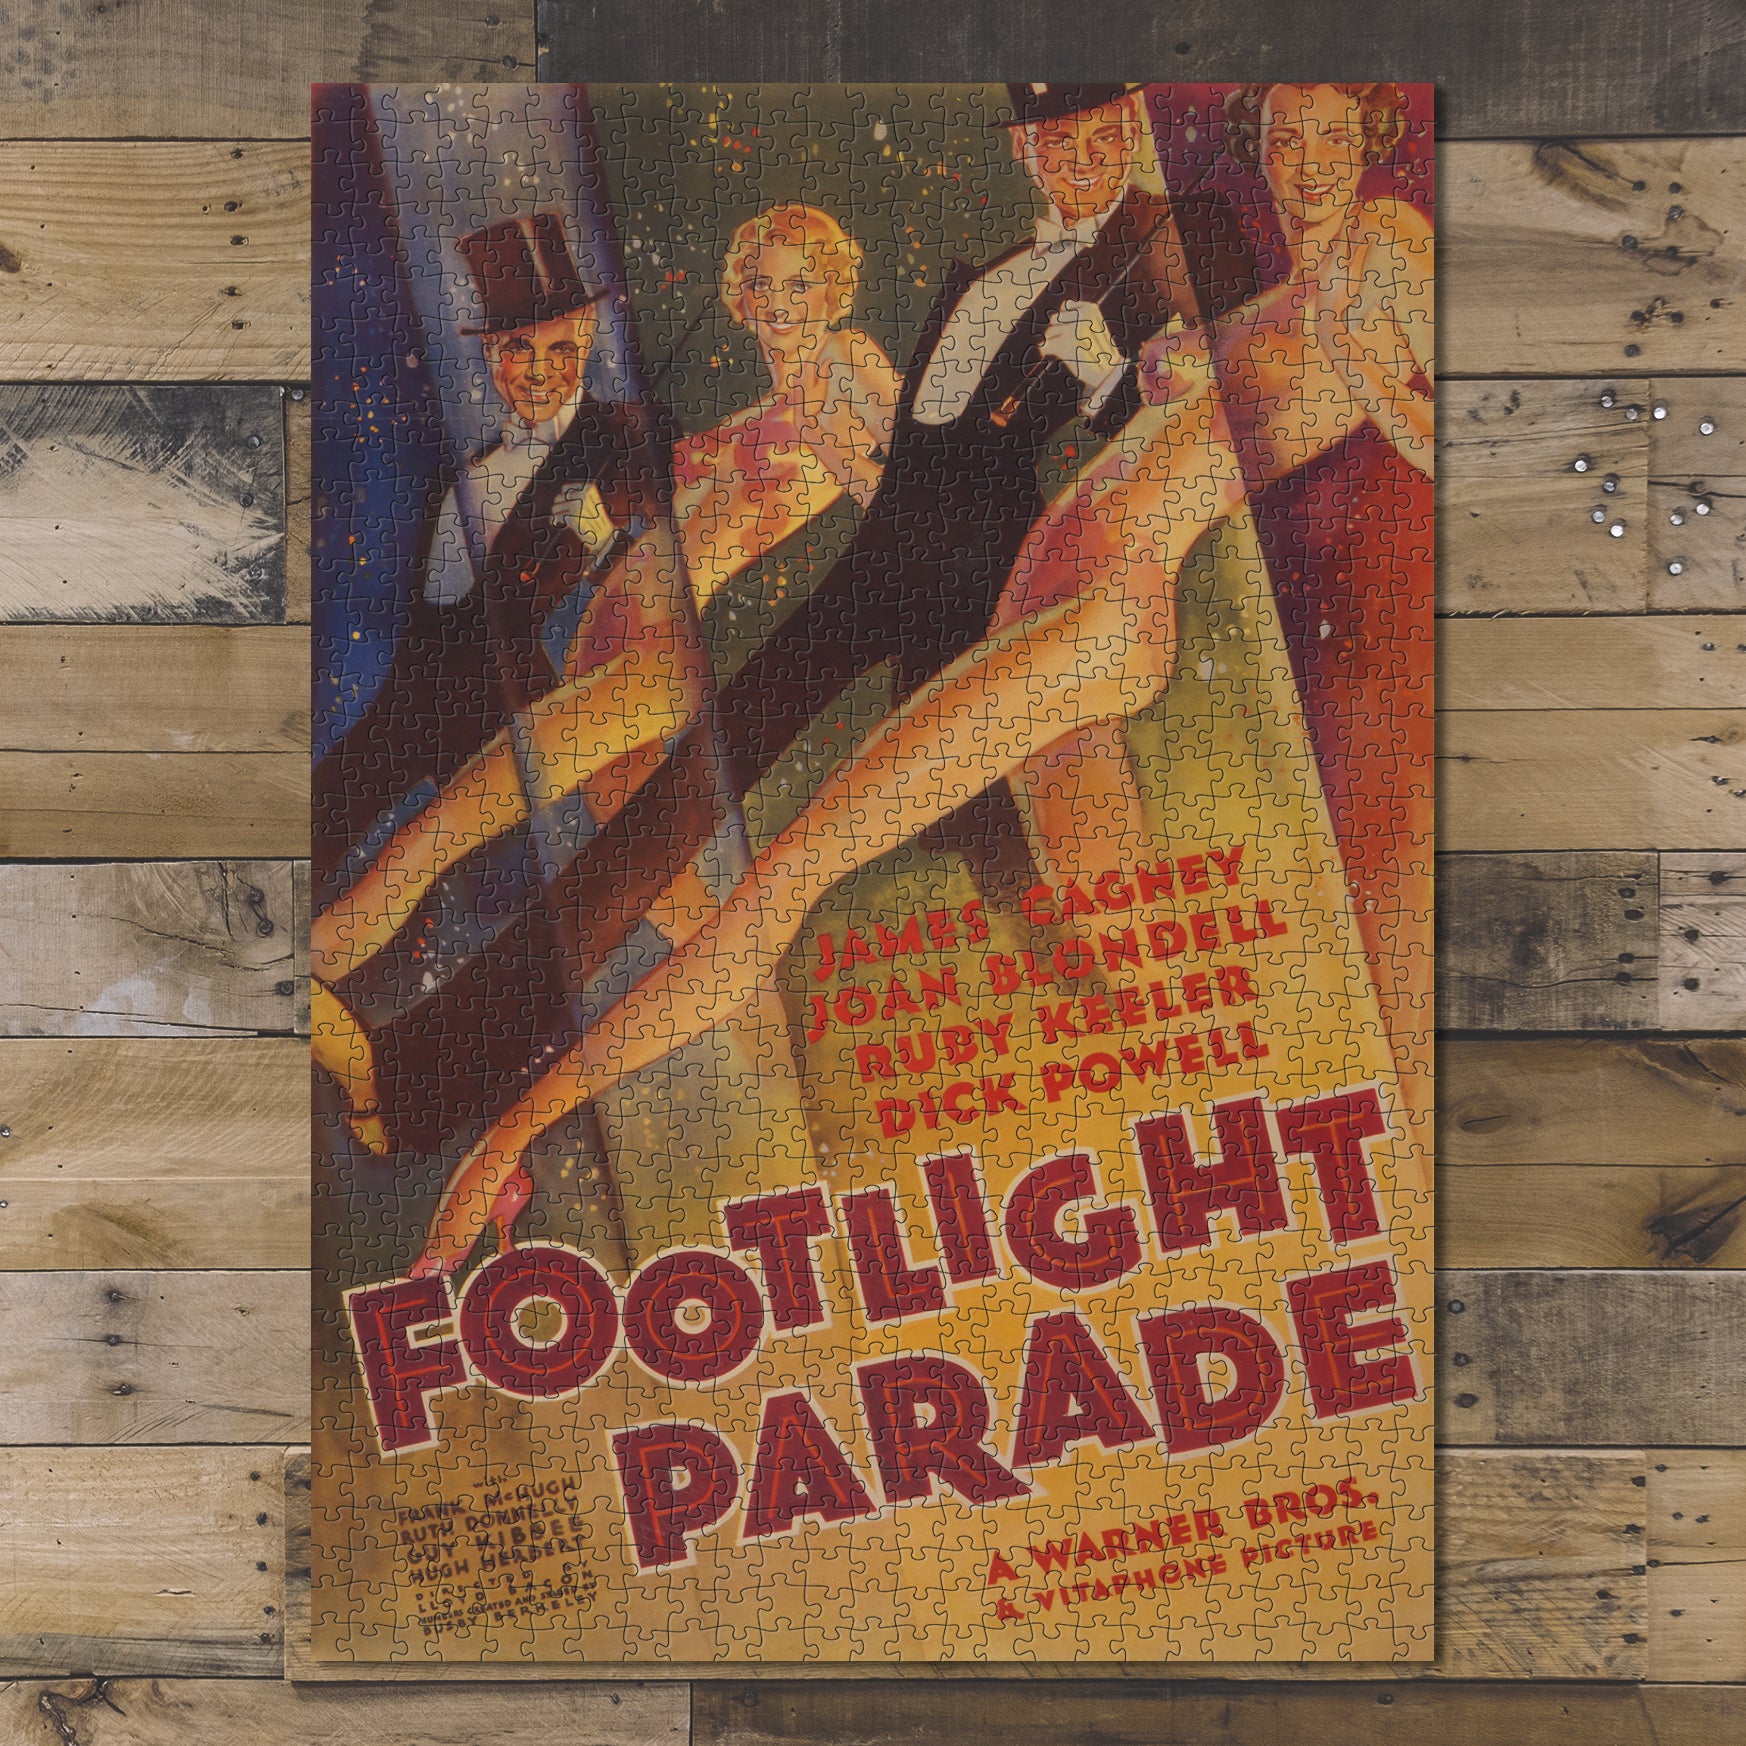 1000 piece puzzle Footlight Parade Jigsaw Puzzle Game for Adults Birthday Present Gifts